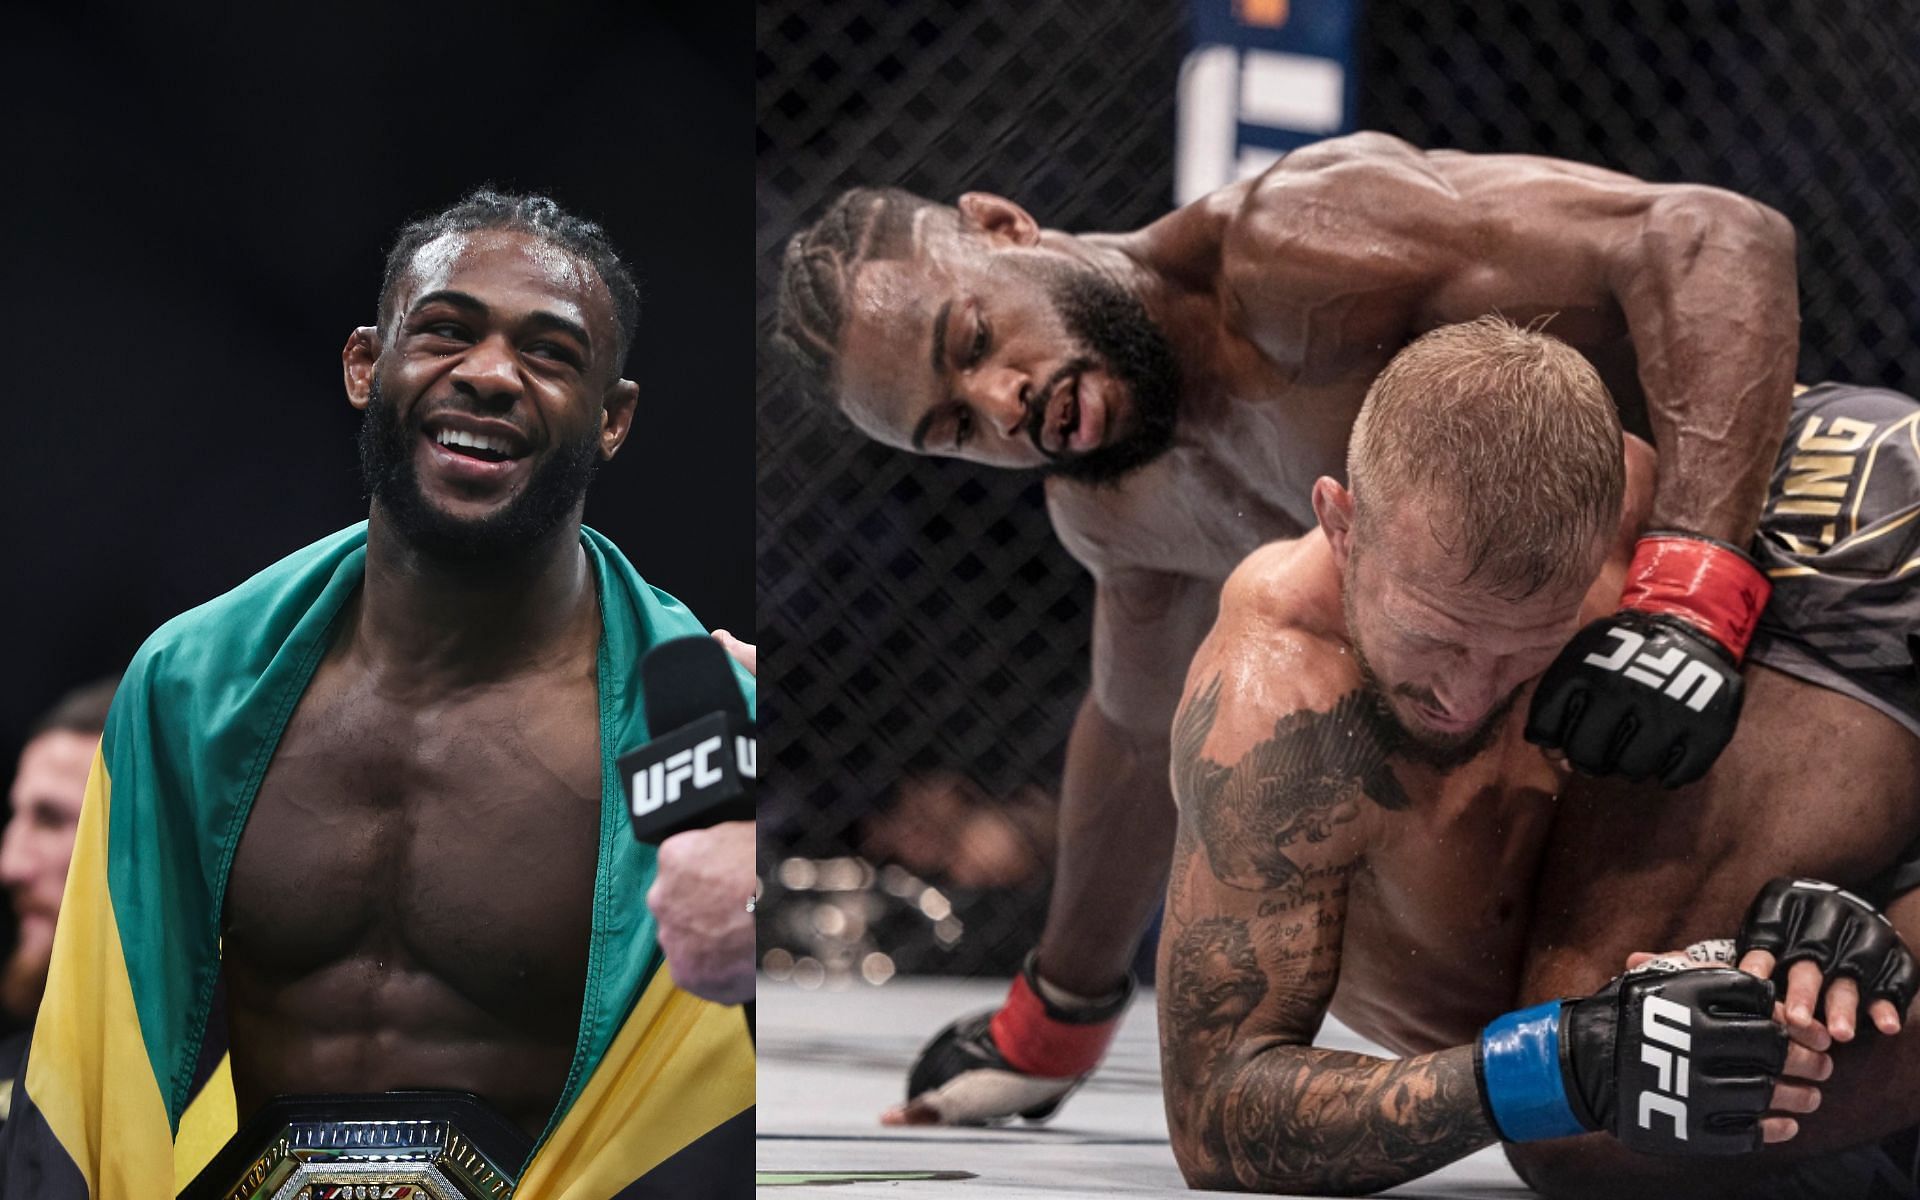 Aljamain Sterling (left) vs. T.J. Dillashaw (right). [Images courtesy: left from Getty Images and right from USA Today] 